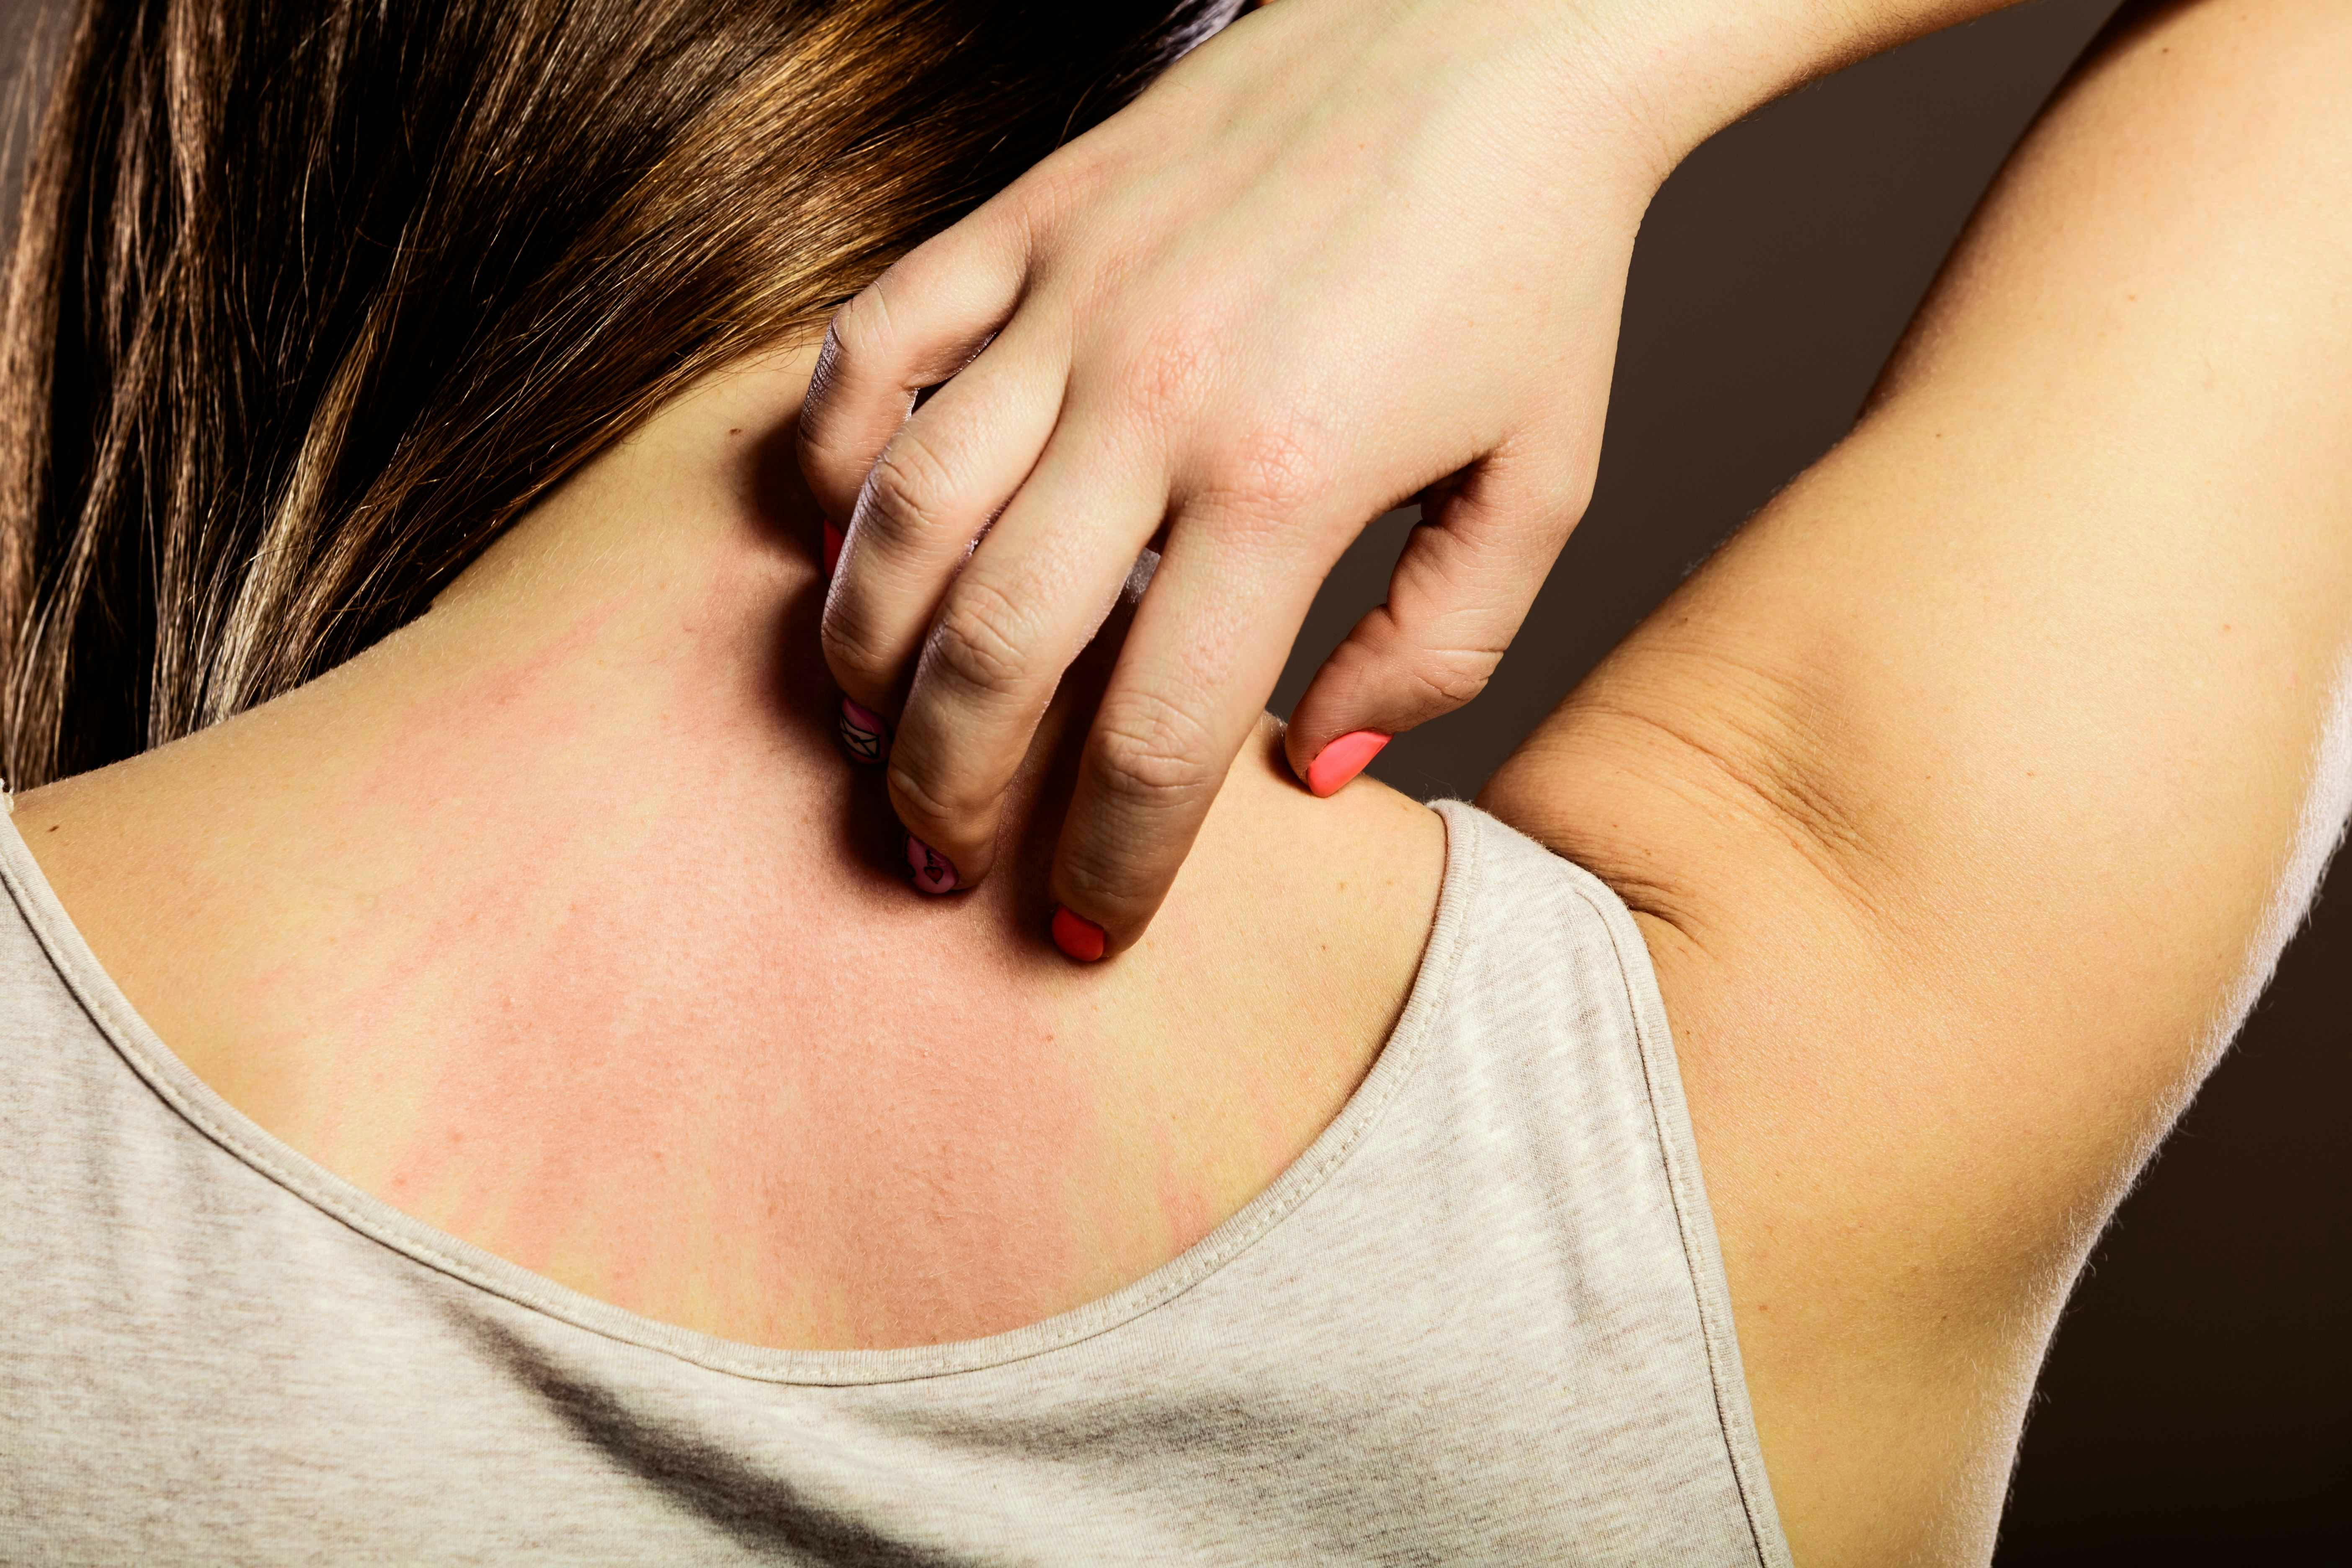 Woman scratches itchy skin on her back